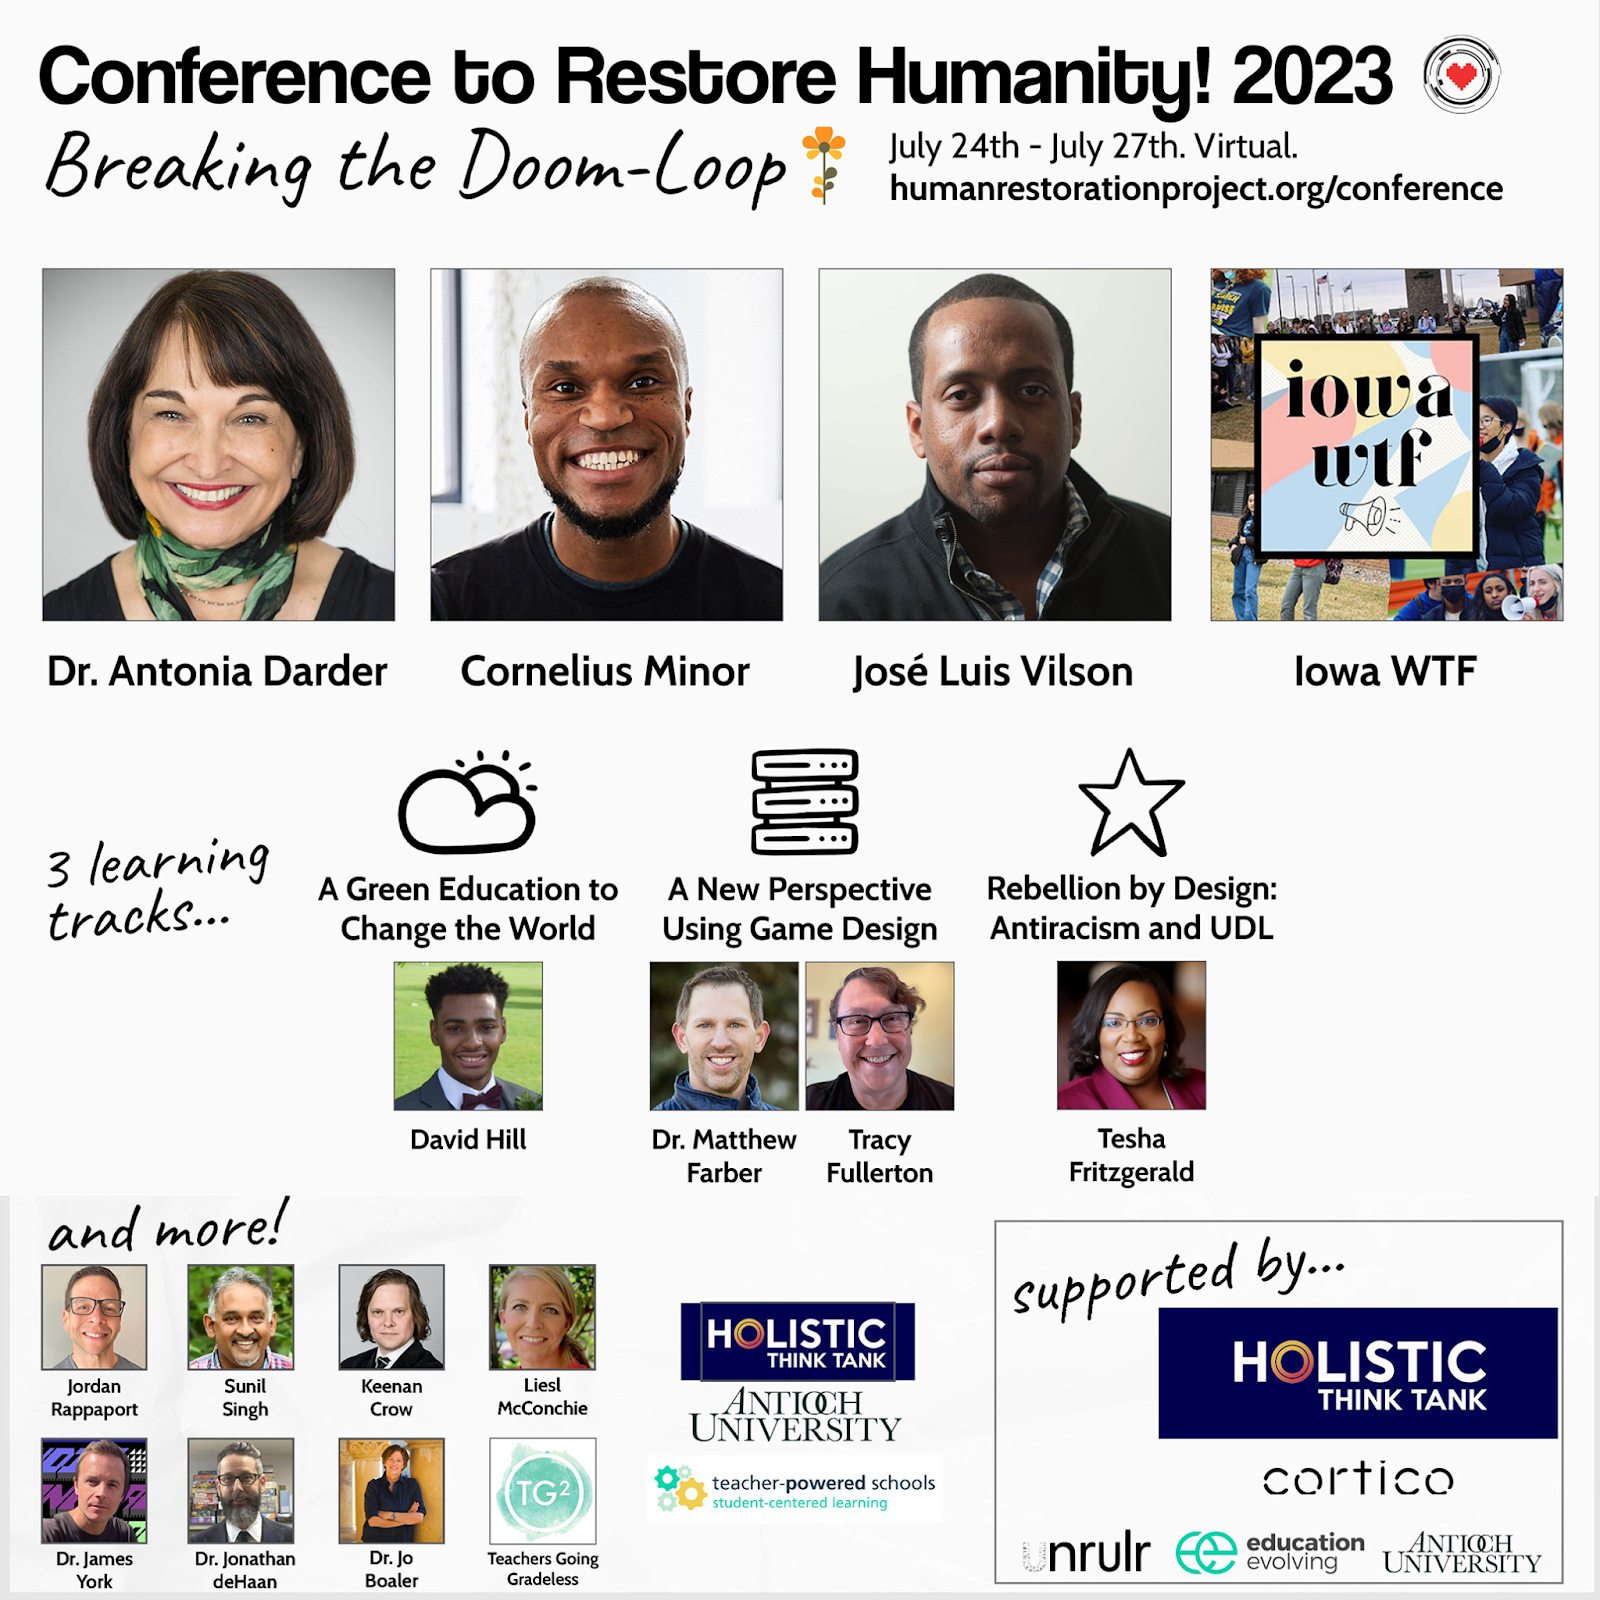 Stimpunks Invites You to Join Us Online at the Conference to Restore Humanity 2023 on July 24th